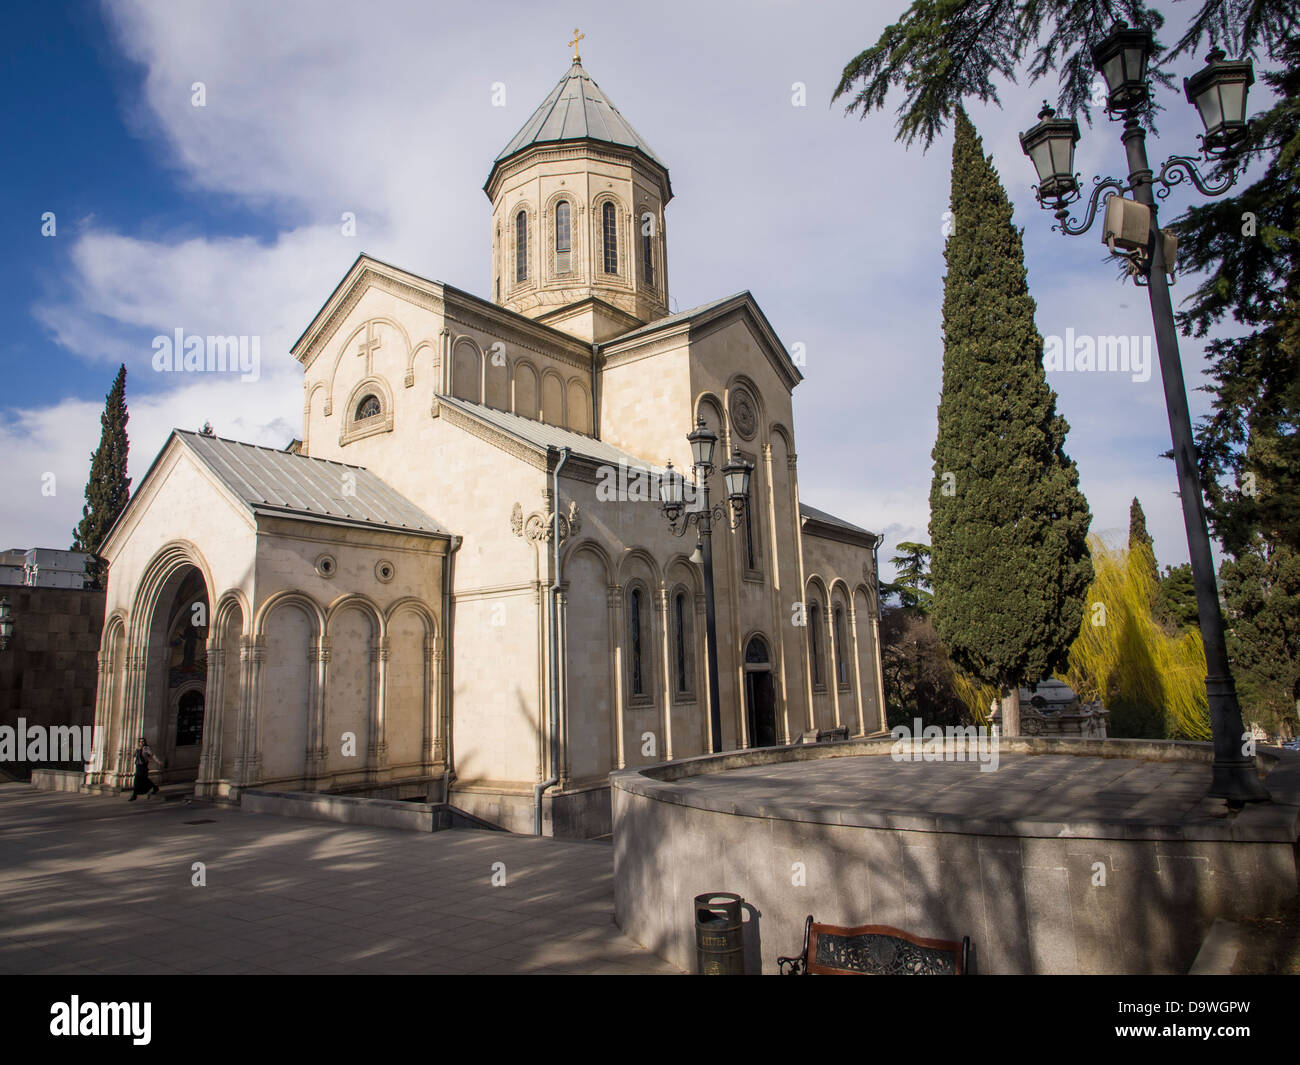 The Kashveti Church of St. George in central Tbilisi, located across from the Parliament building on Rustaveli Avenue. Stock Photo